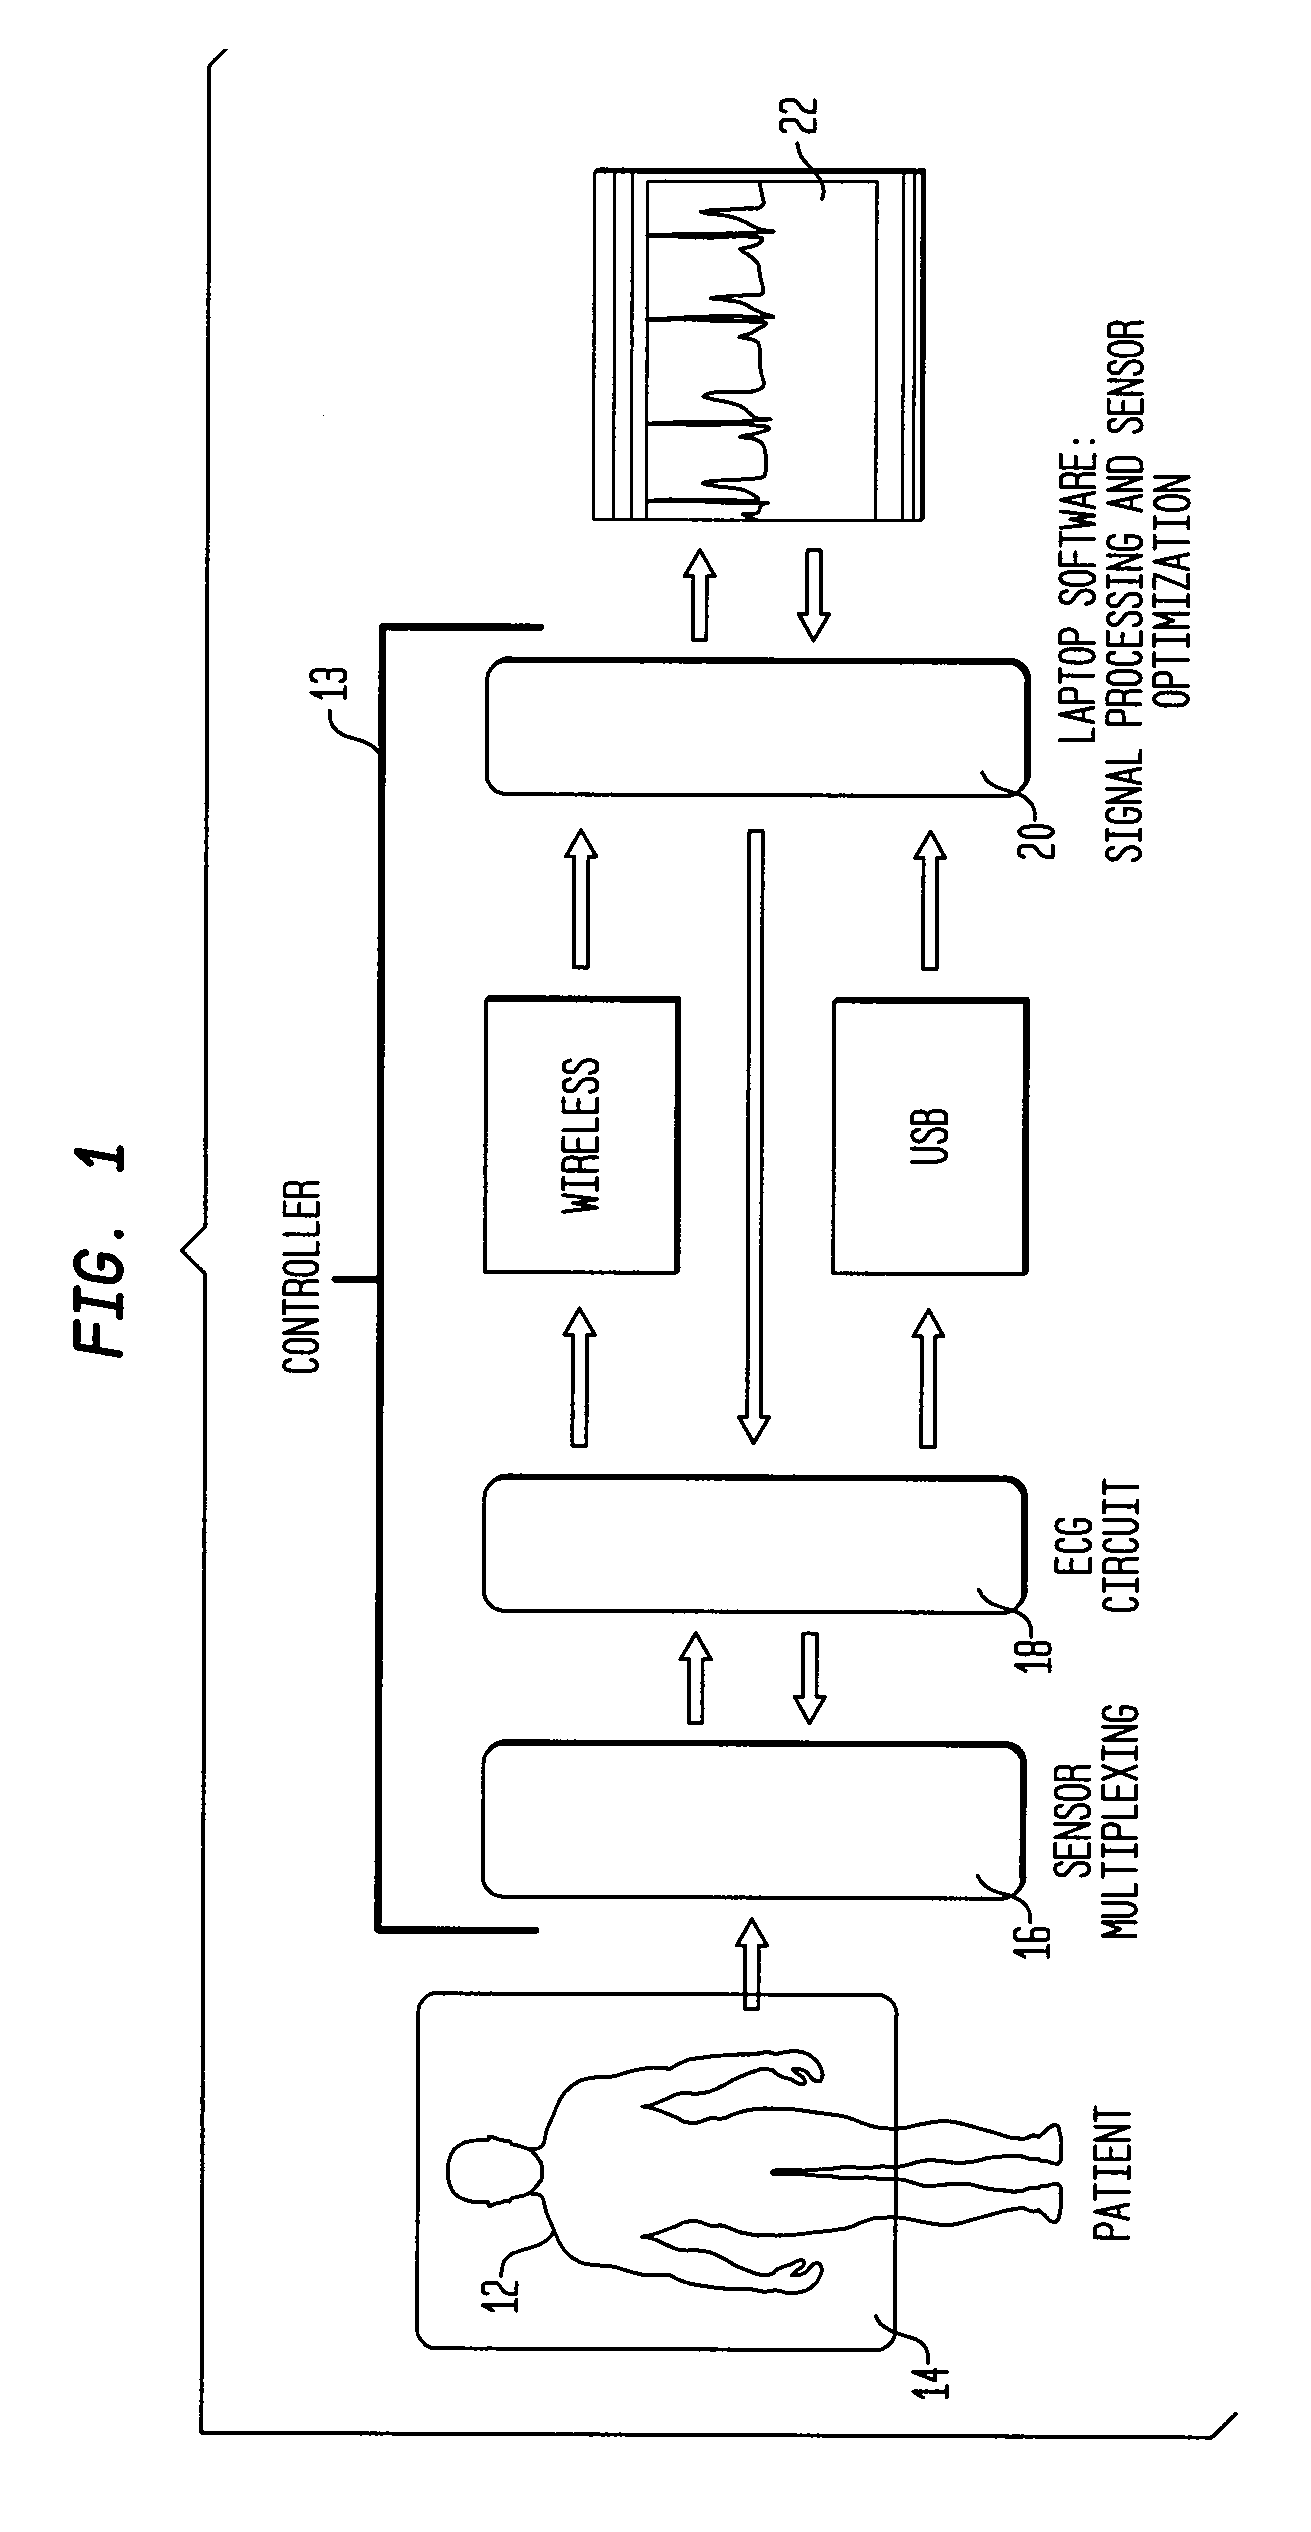 Patient monitoring systems and methods